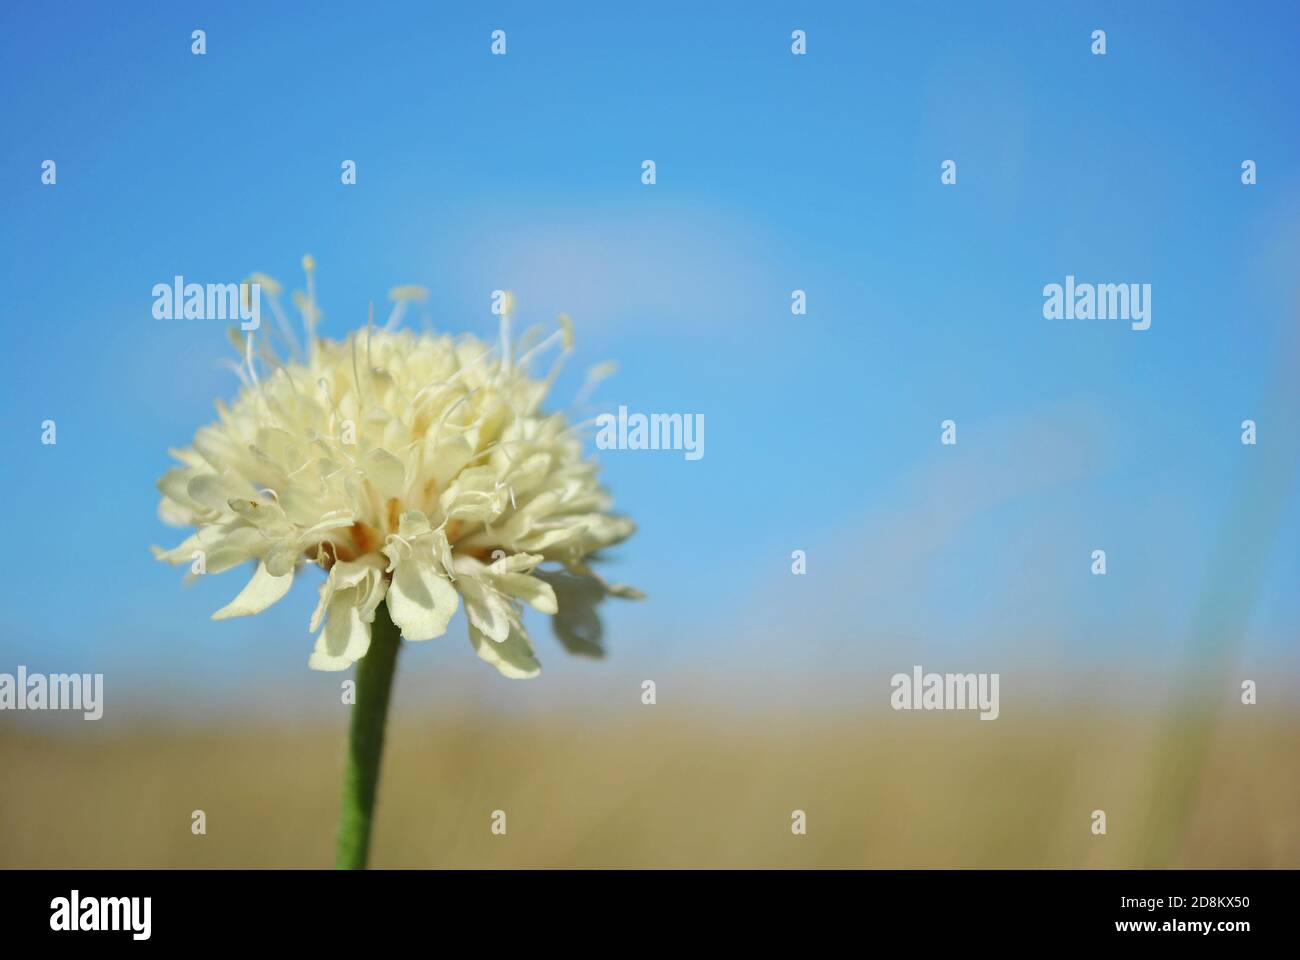 Cephalaria white flower blooming, close up macro detail on soft blurry sky and grass line background Stock Photo